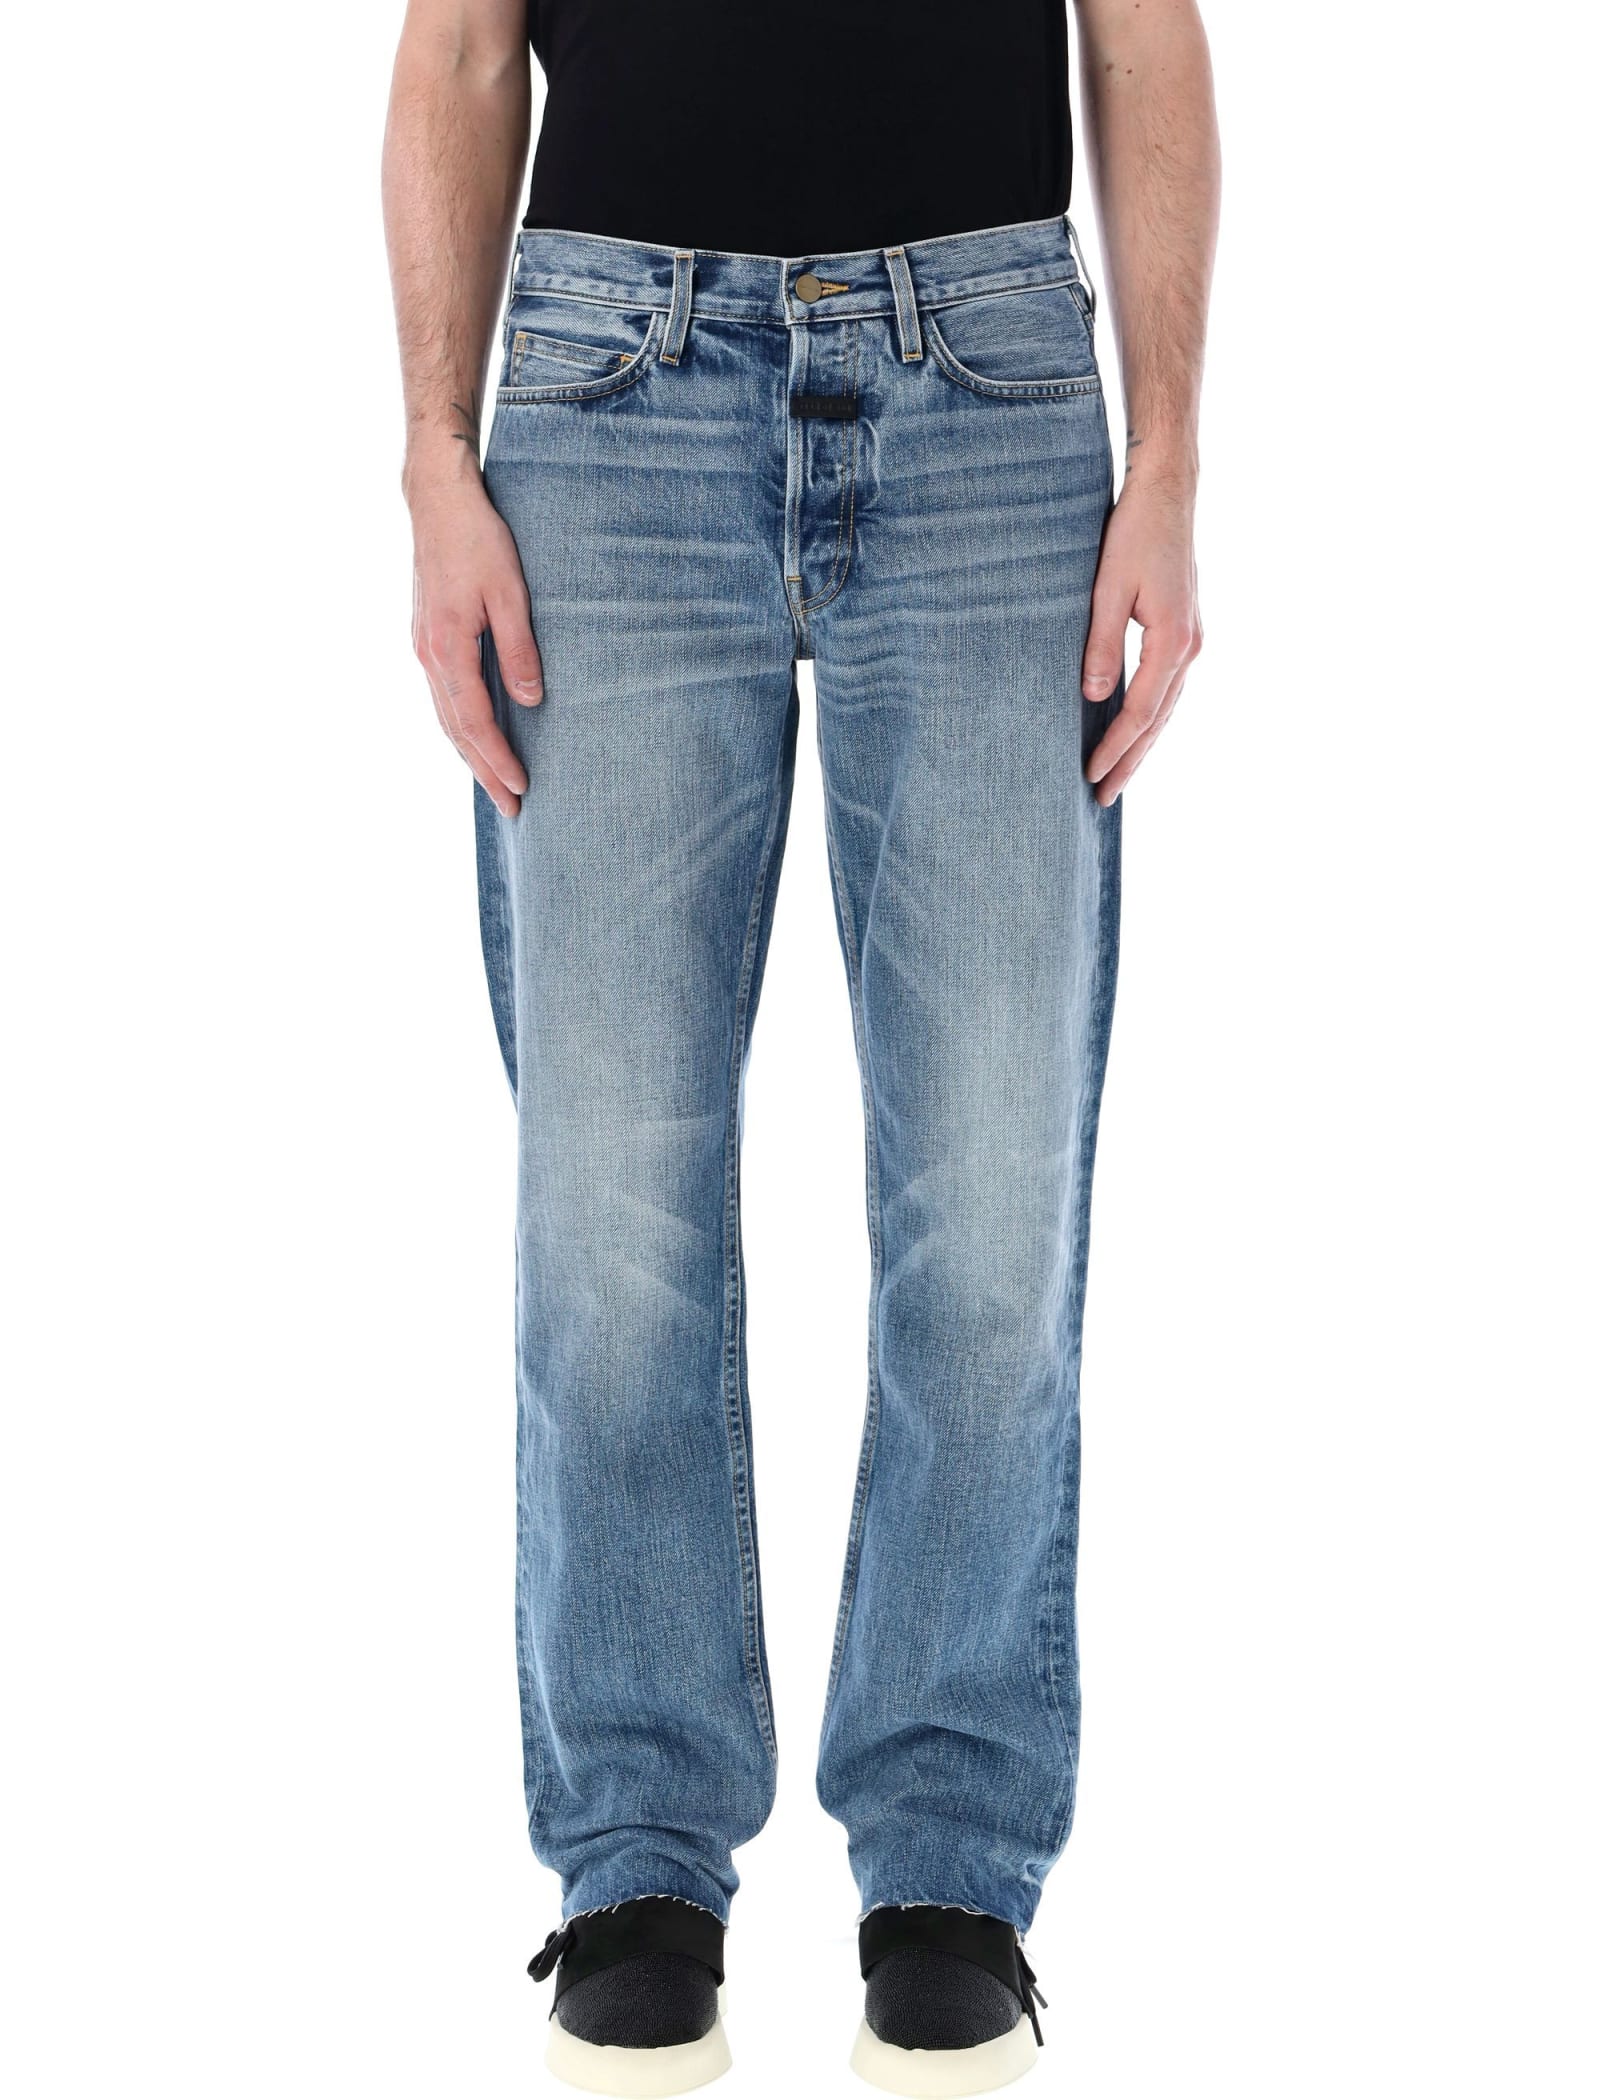 Fear of God Collection 8 Jeans